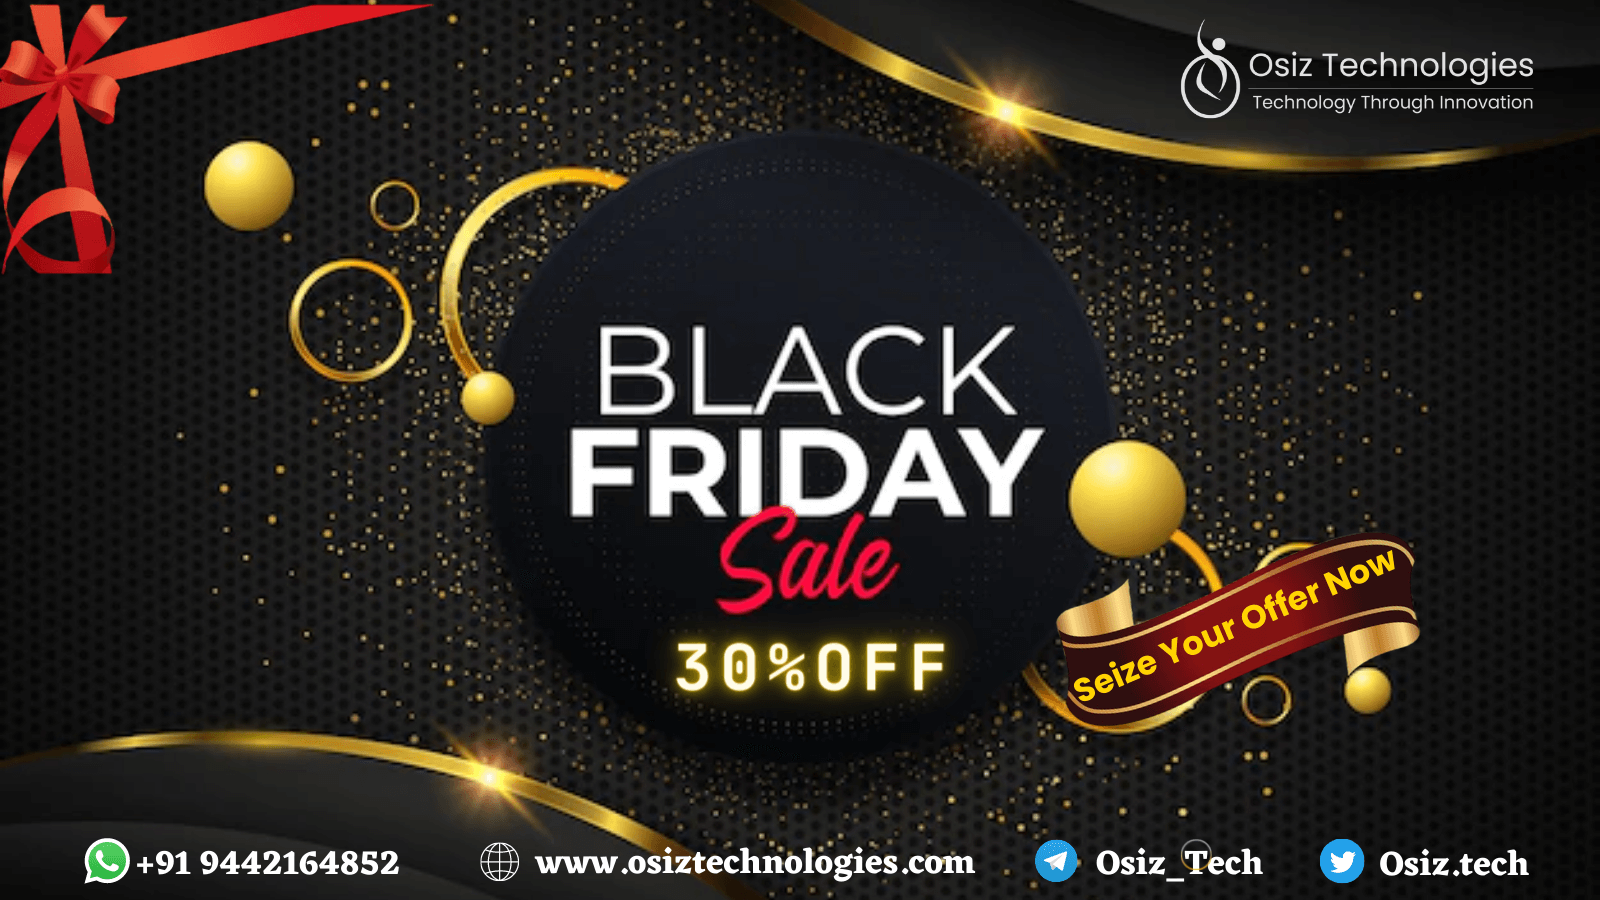 Black Friday Sale 2022 - Get A Special Discount For All Crypto & Blockchain Projects